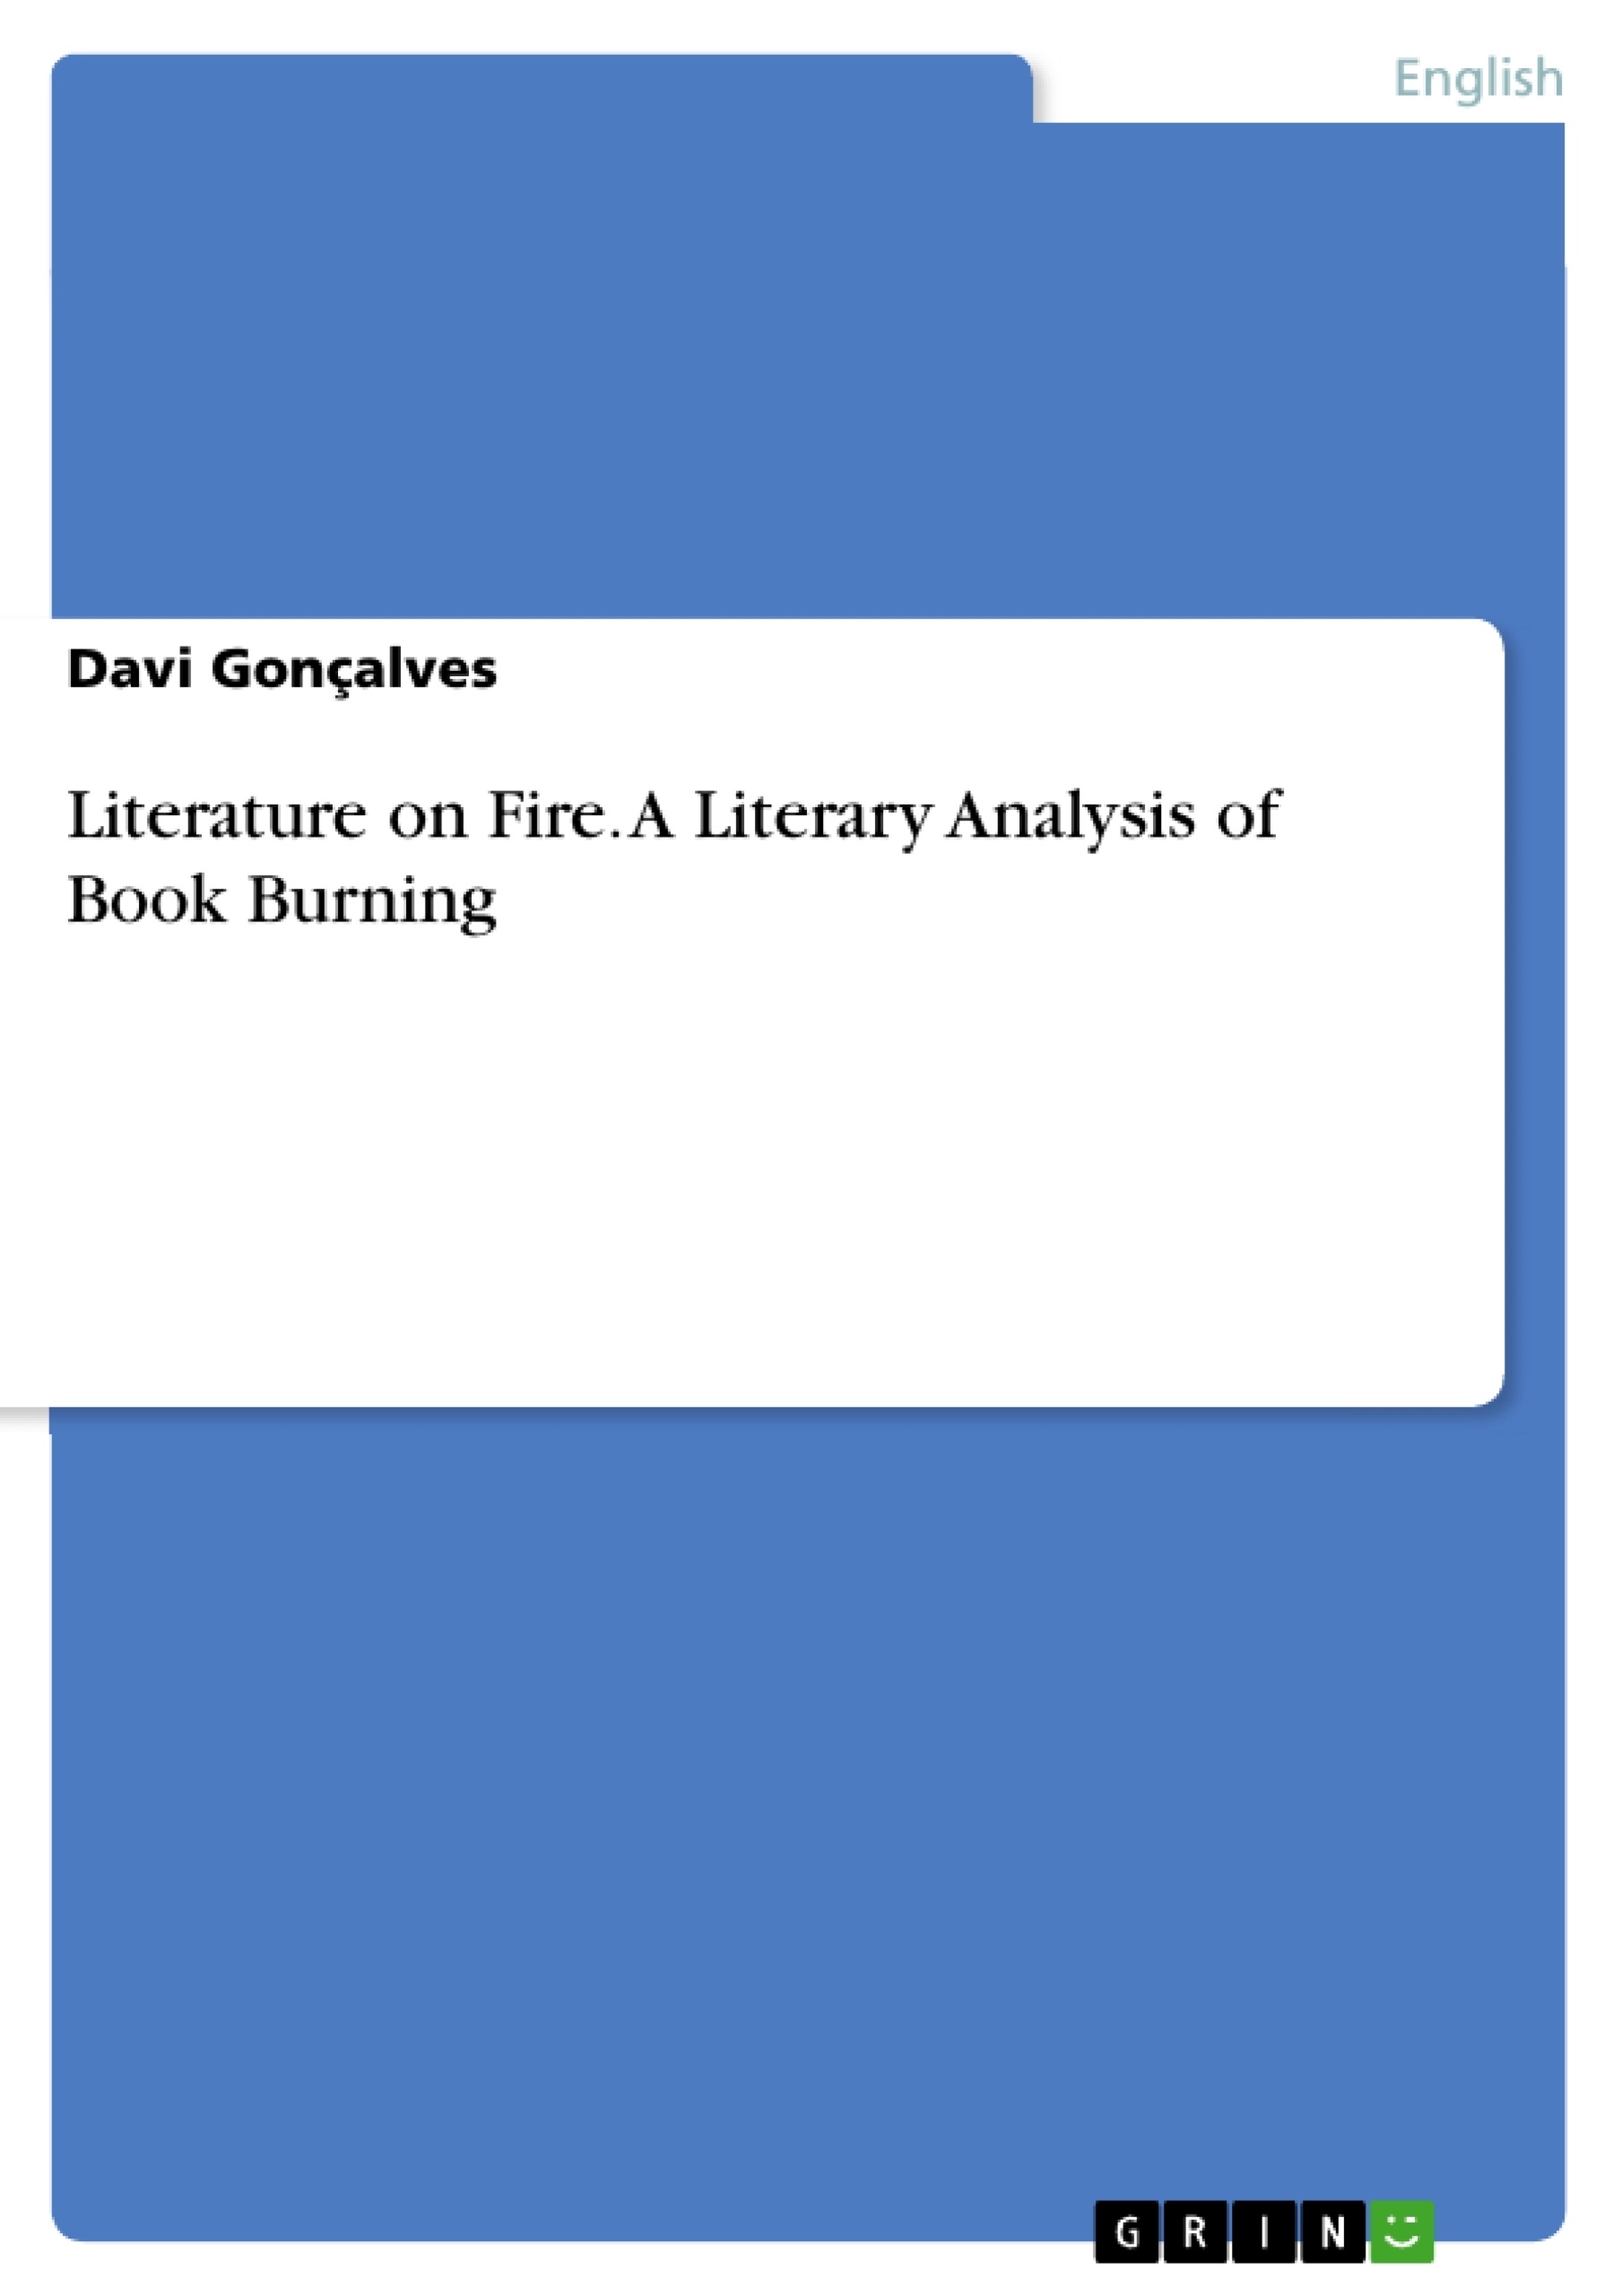 Título: Literature on Fire. A Literary Analysis of Book Burning